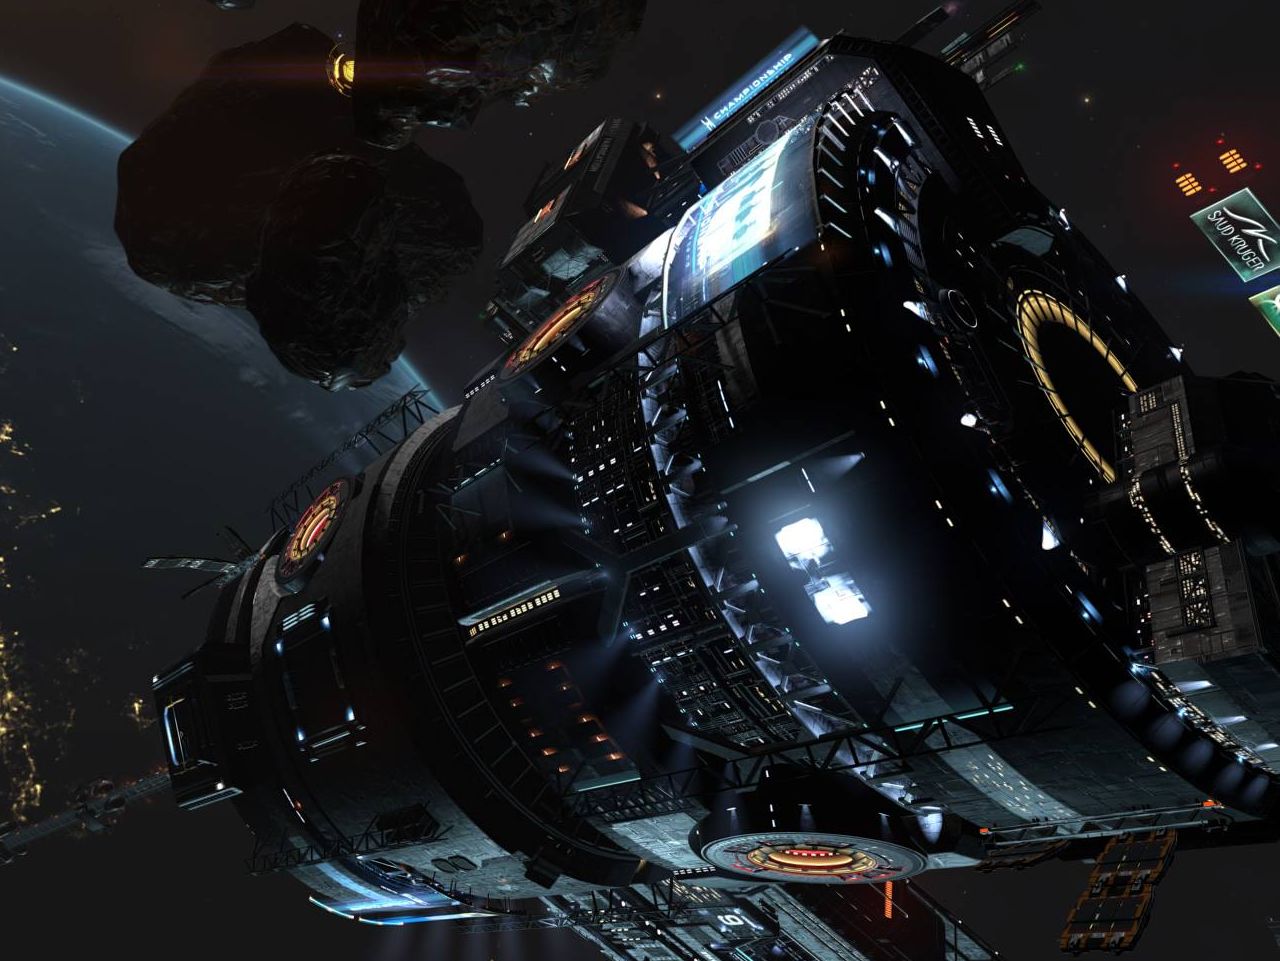 Elite Dangerous: Odyssey has launched to you can land